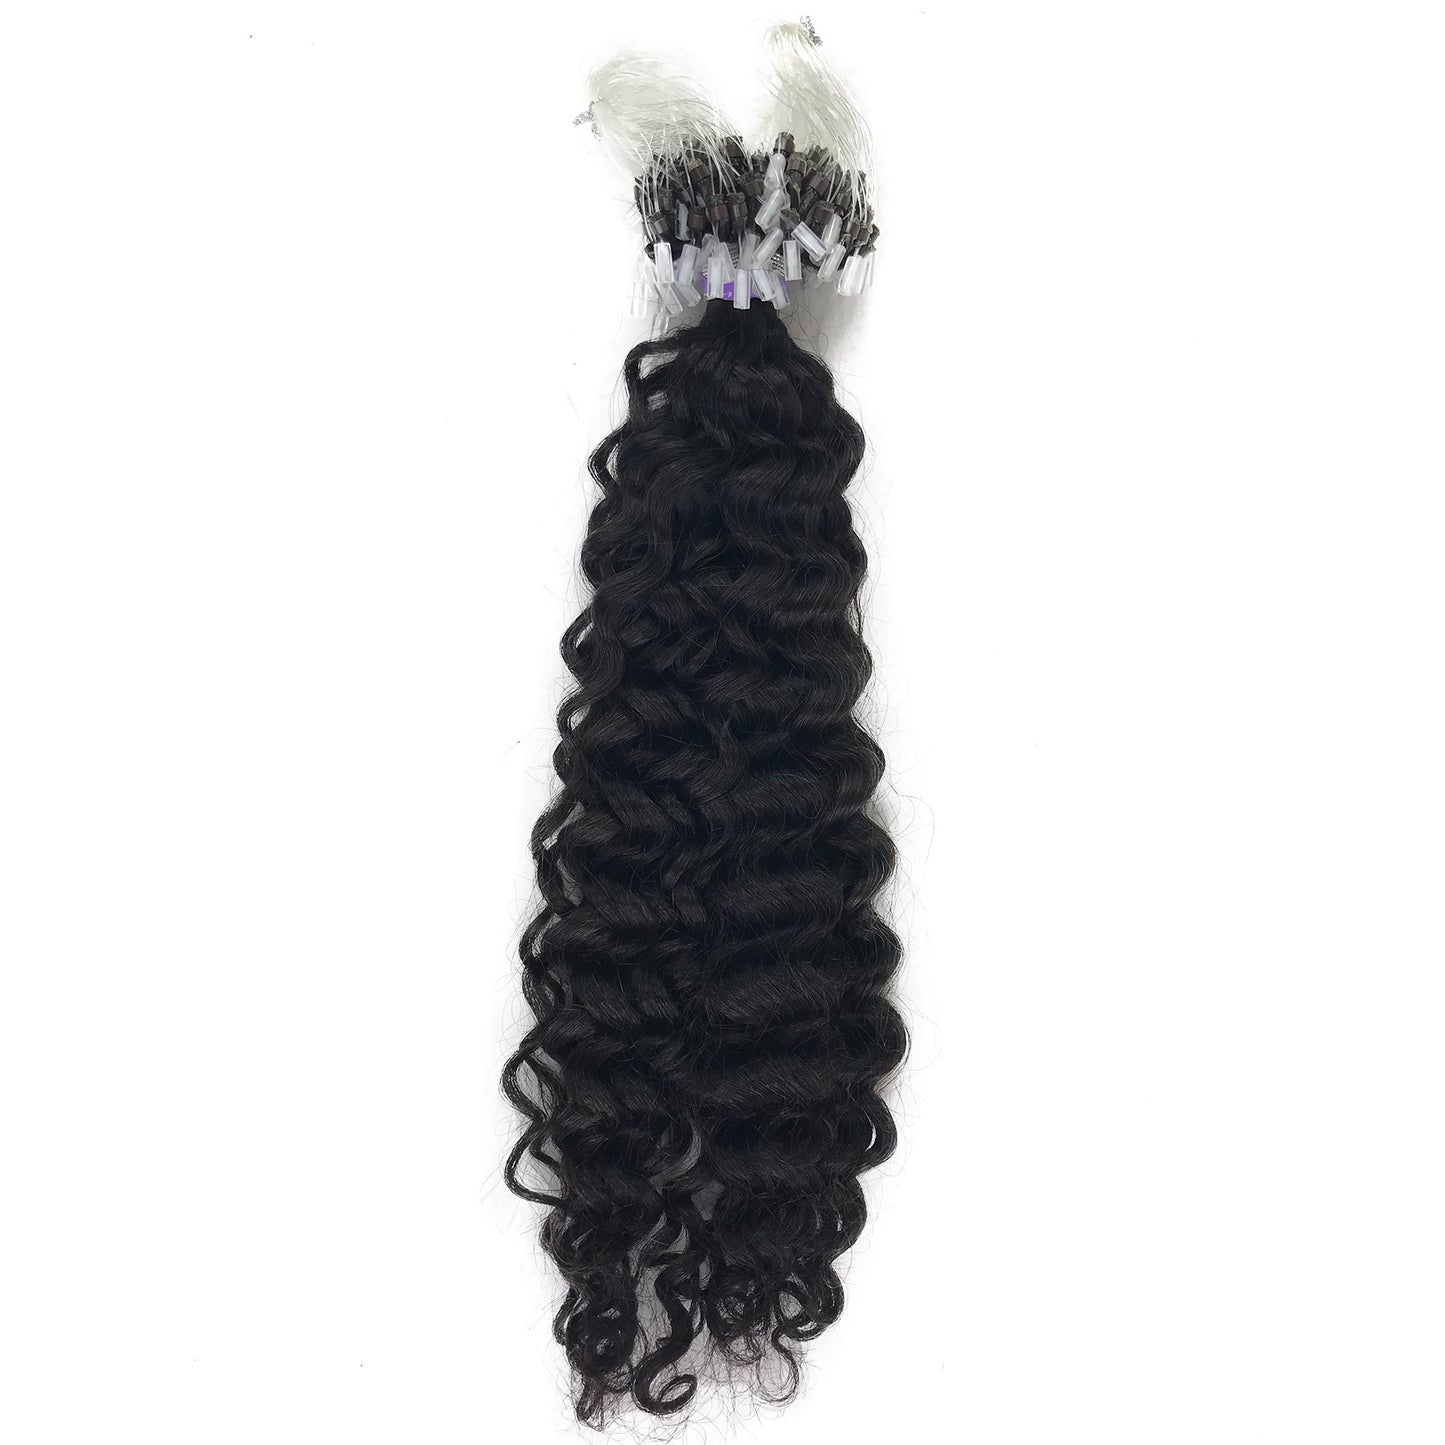 Load image into Gallery viewer, 8A Micro Link Jerry Curl Human Hair Extension Natural Black - eHair Outlet
